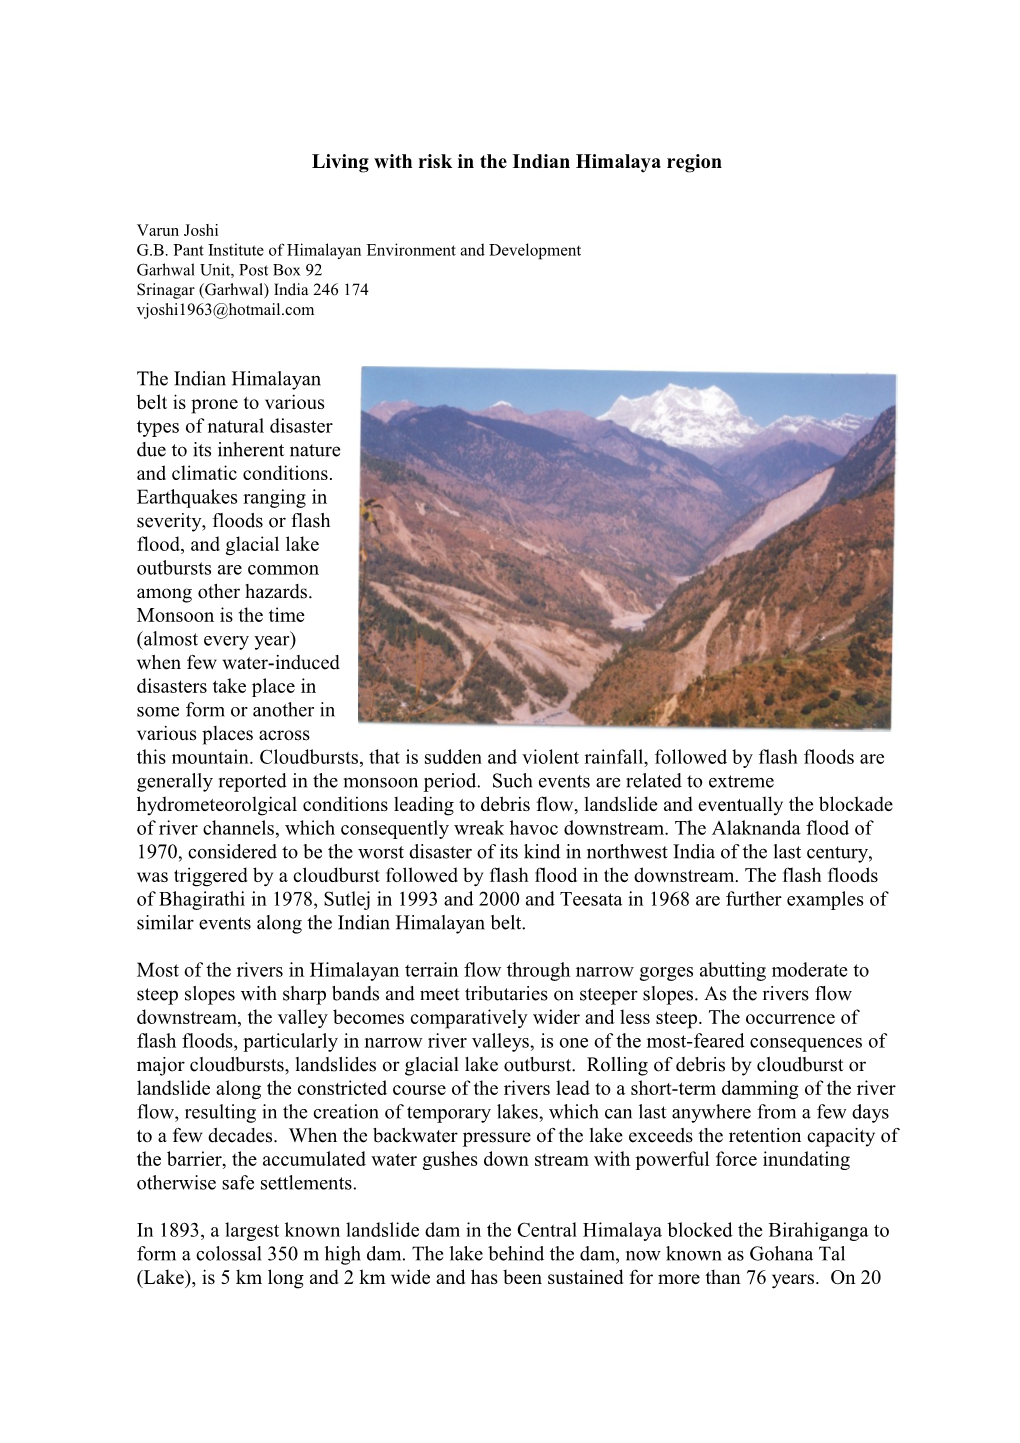 Flash Floods: Causes, Consequences and Its Management in Indian Himalaya with Special Reference